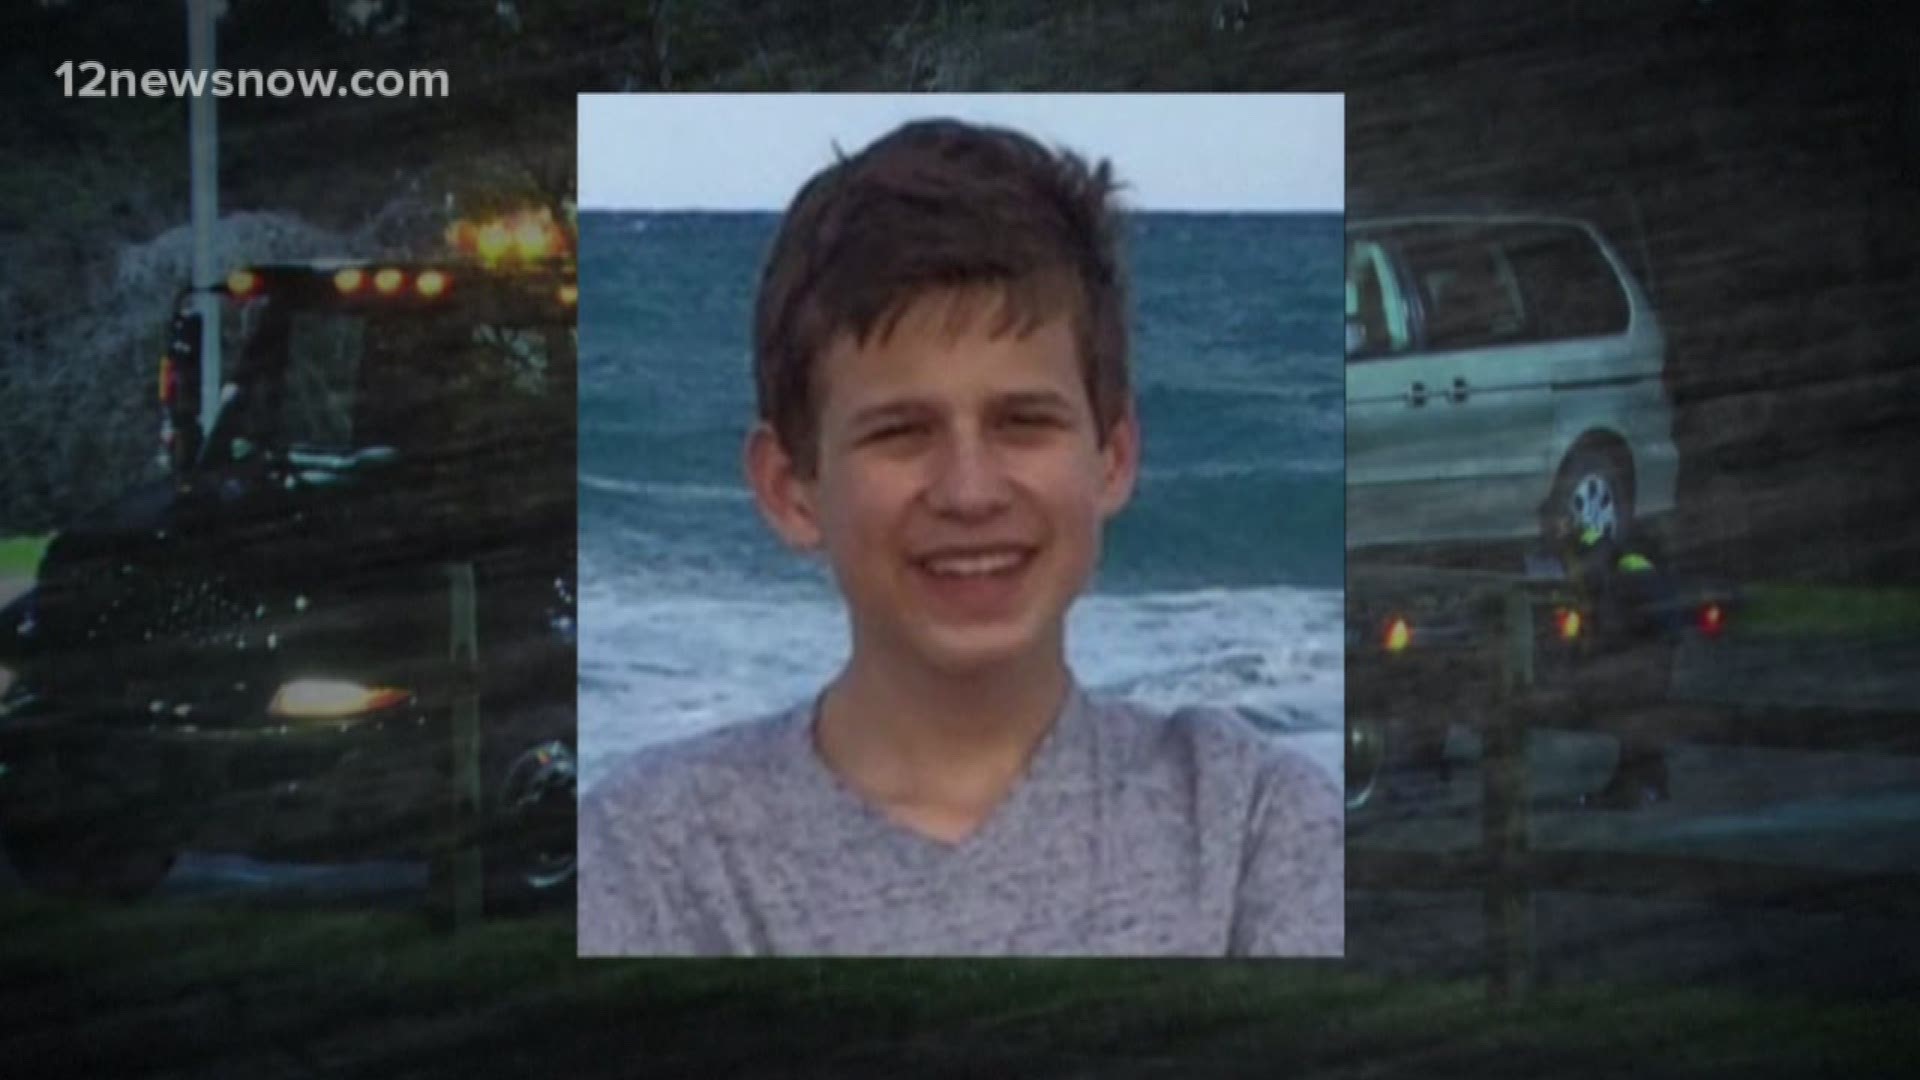 An Ohio teen who died after being crushed by a minivan seat called 911 twice for help.  The dispatcher who received 16-year-old Kyle Plush's second call never conveyed the detailed information to officers .. possibly believing the call was a prank. 